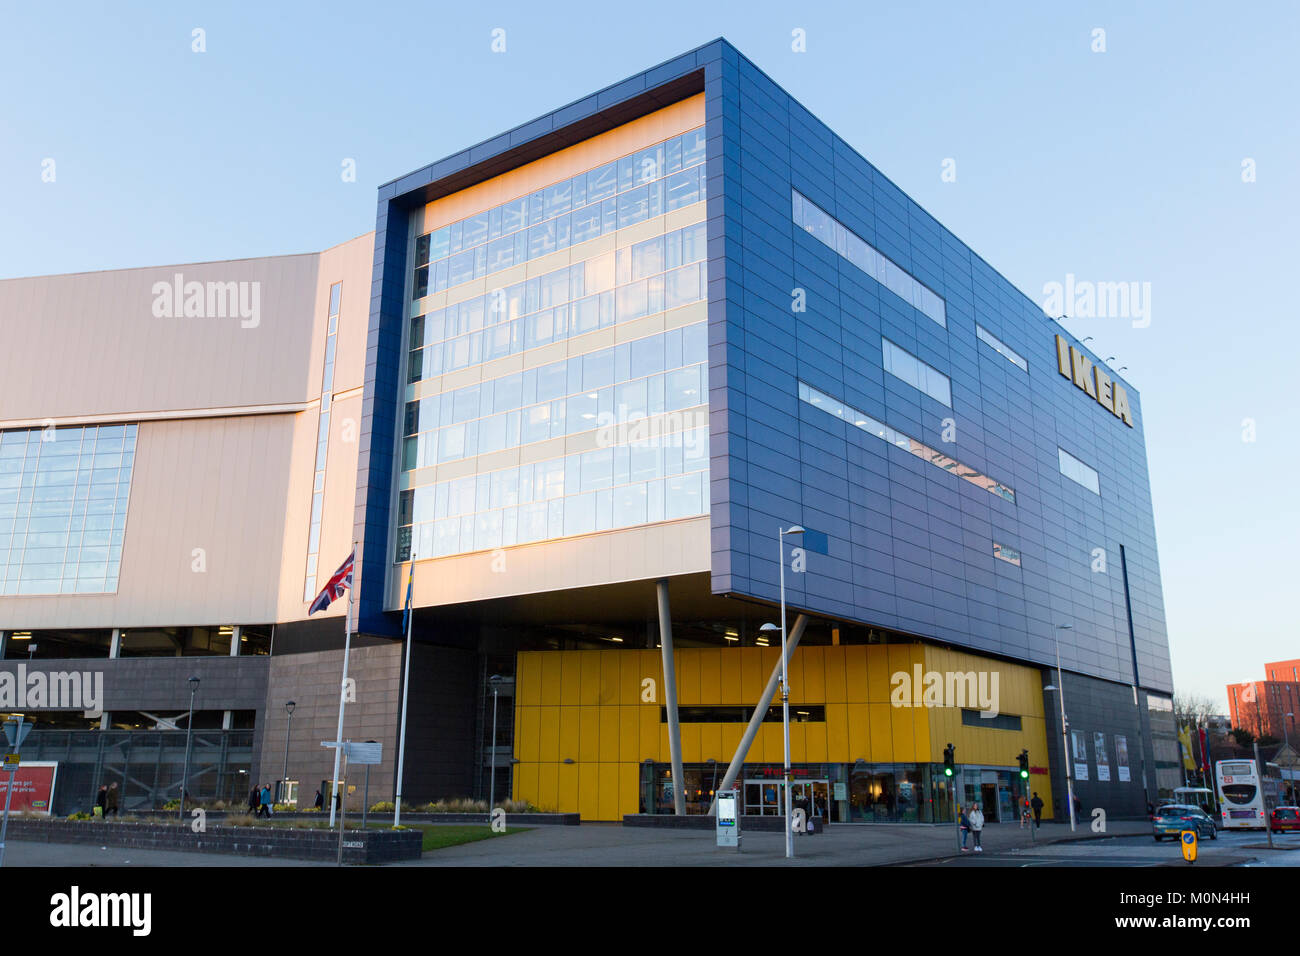 The Ikea store in Coventry, UK Stock Photo